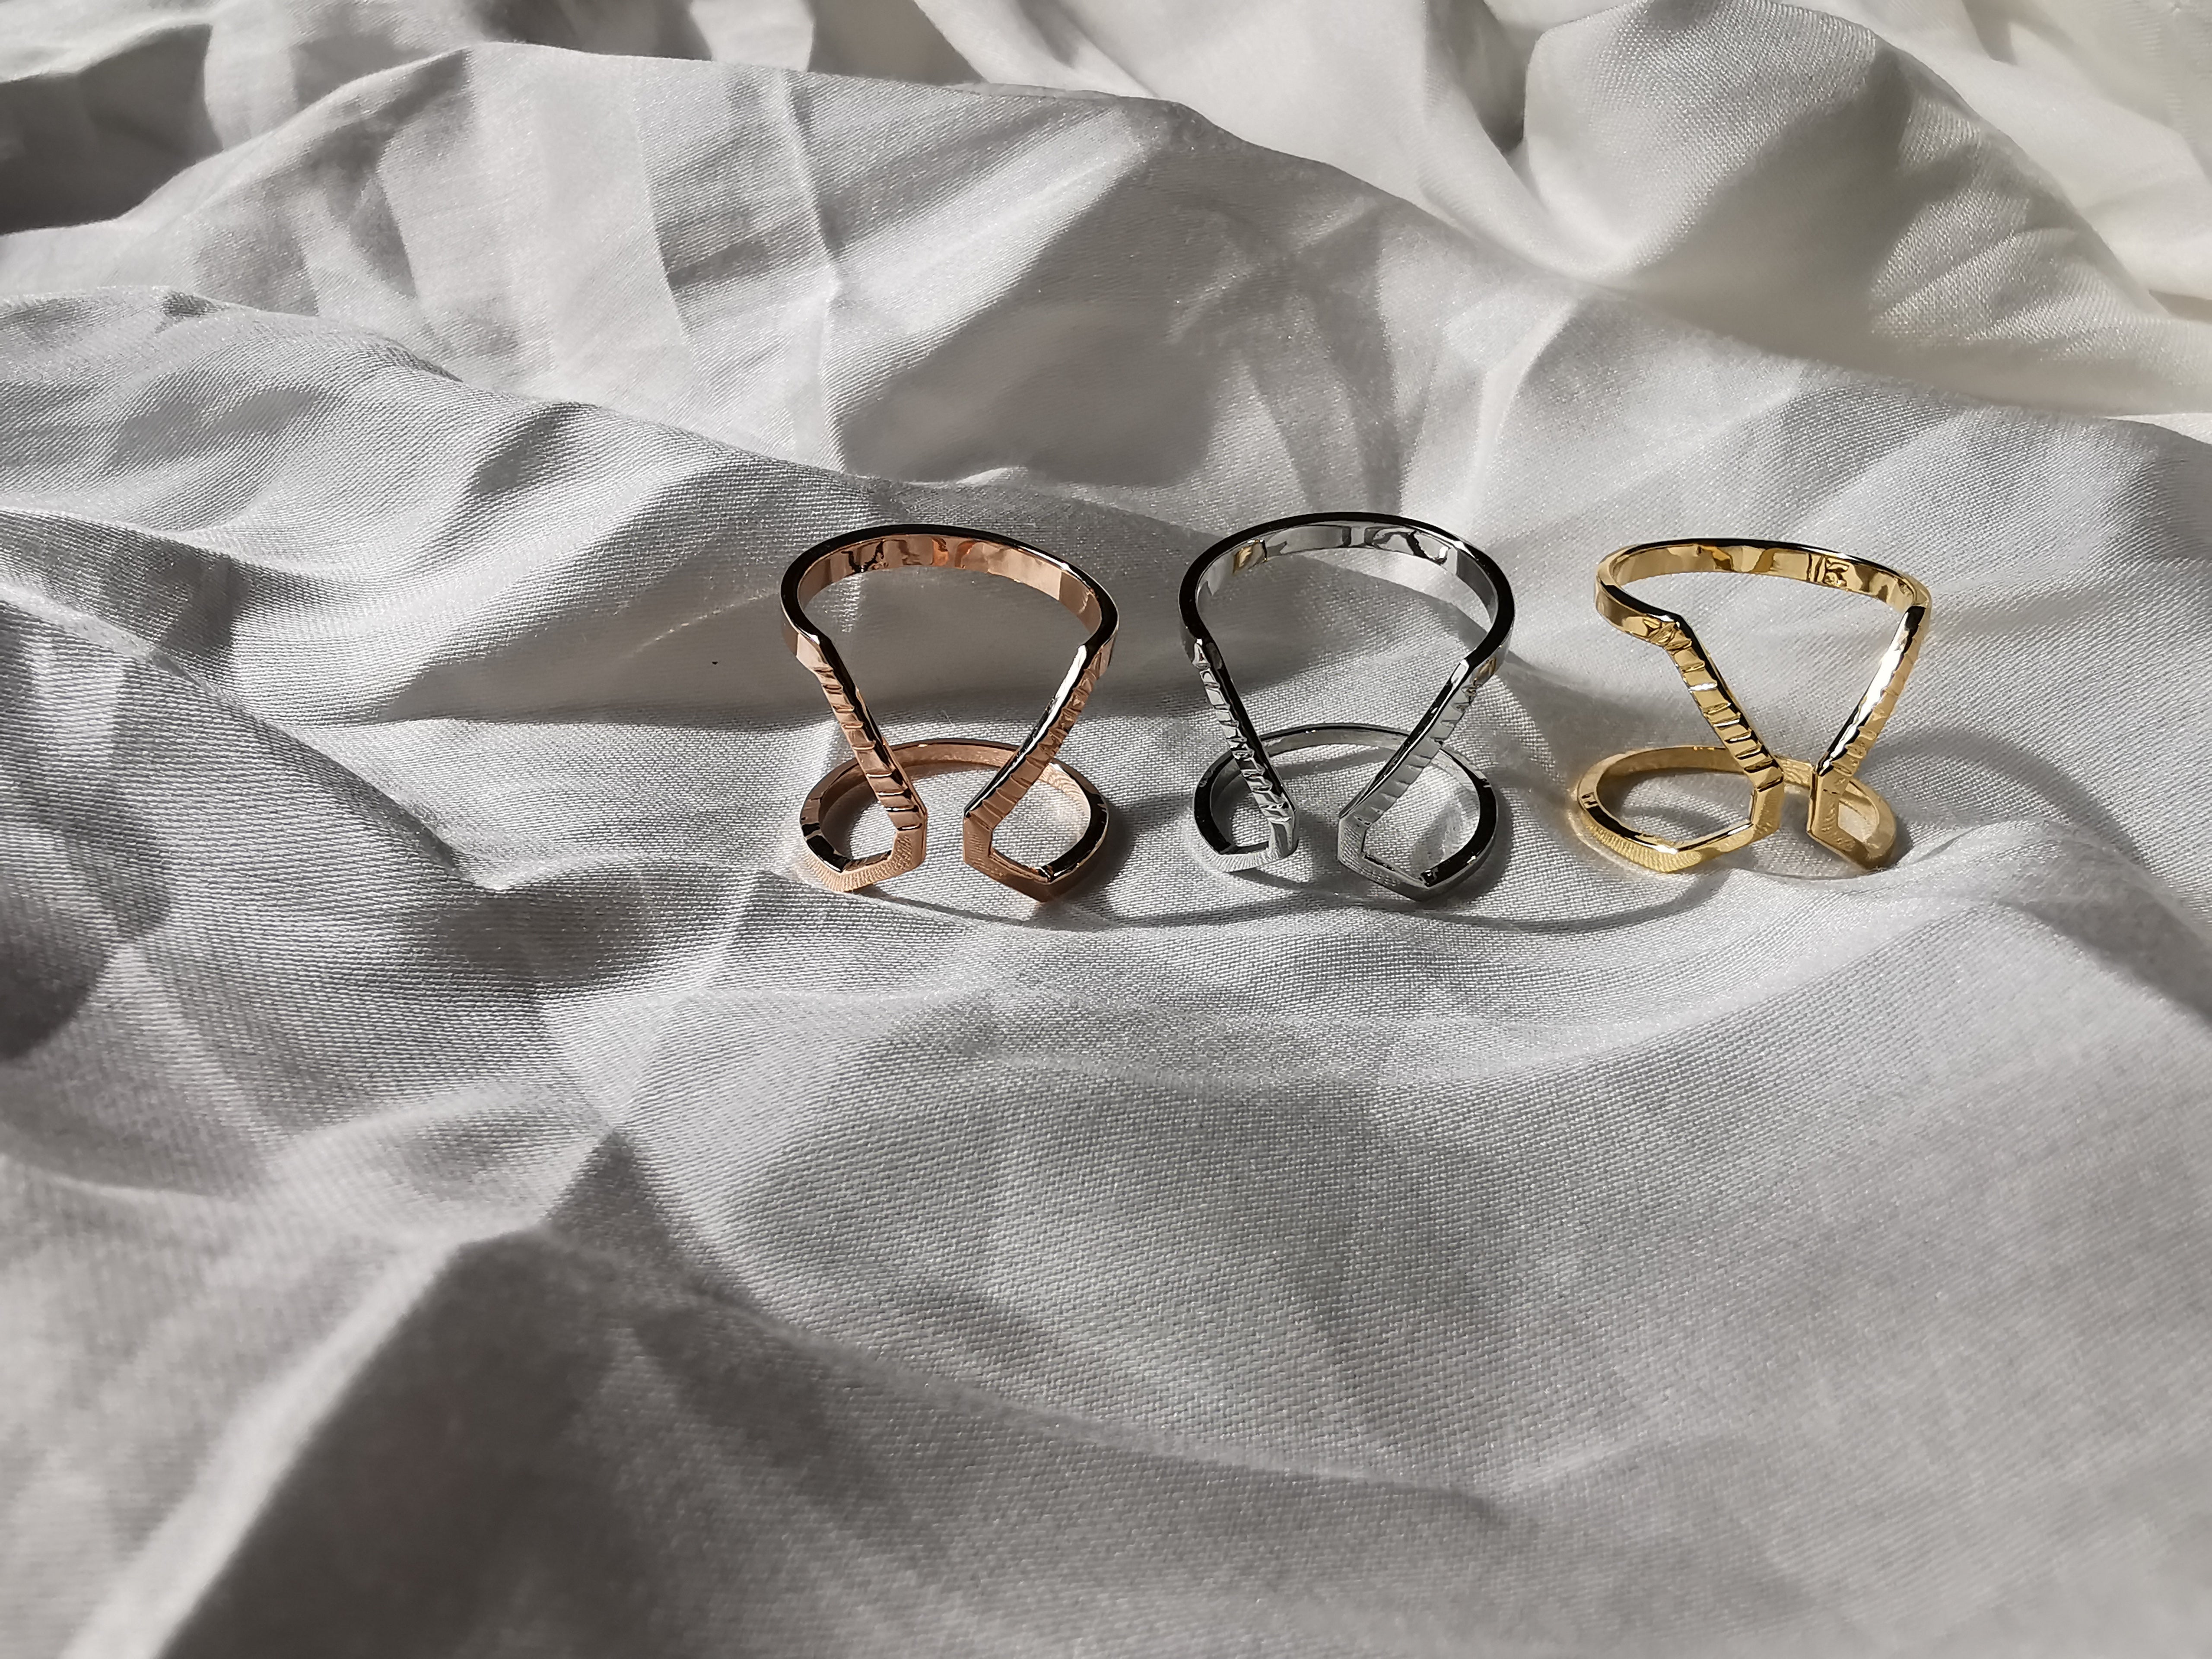 silver sustainable jewellery recycled rings cuffs bracelets ethical accessories women